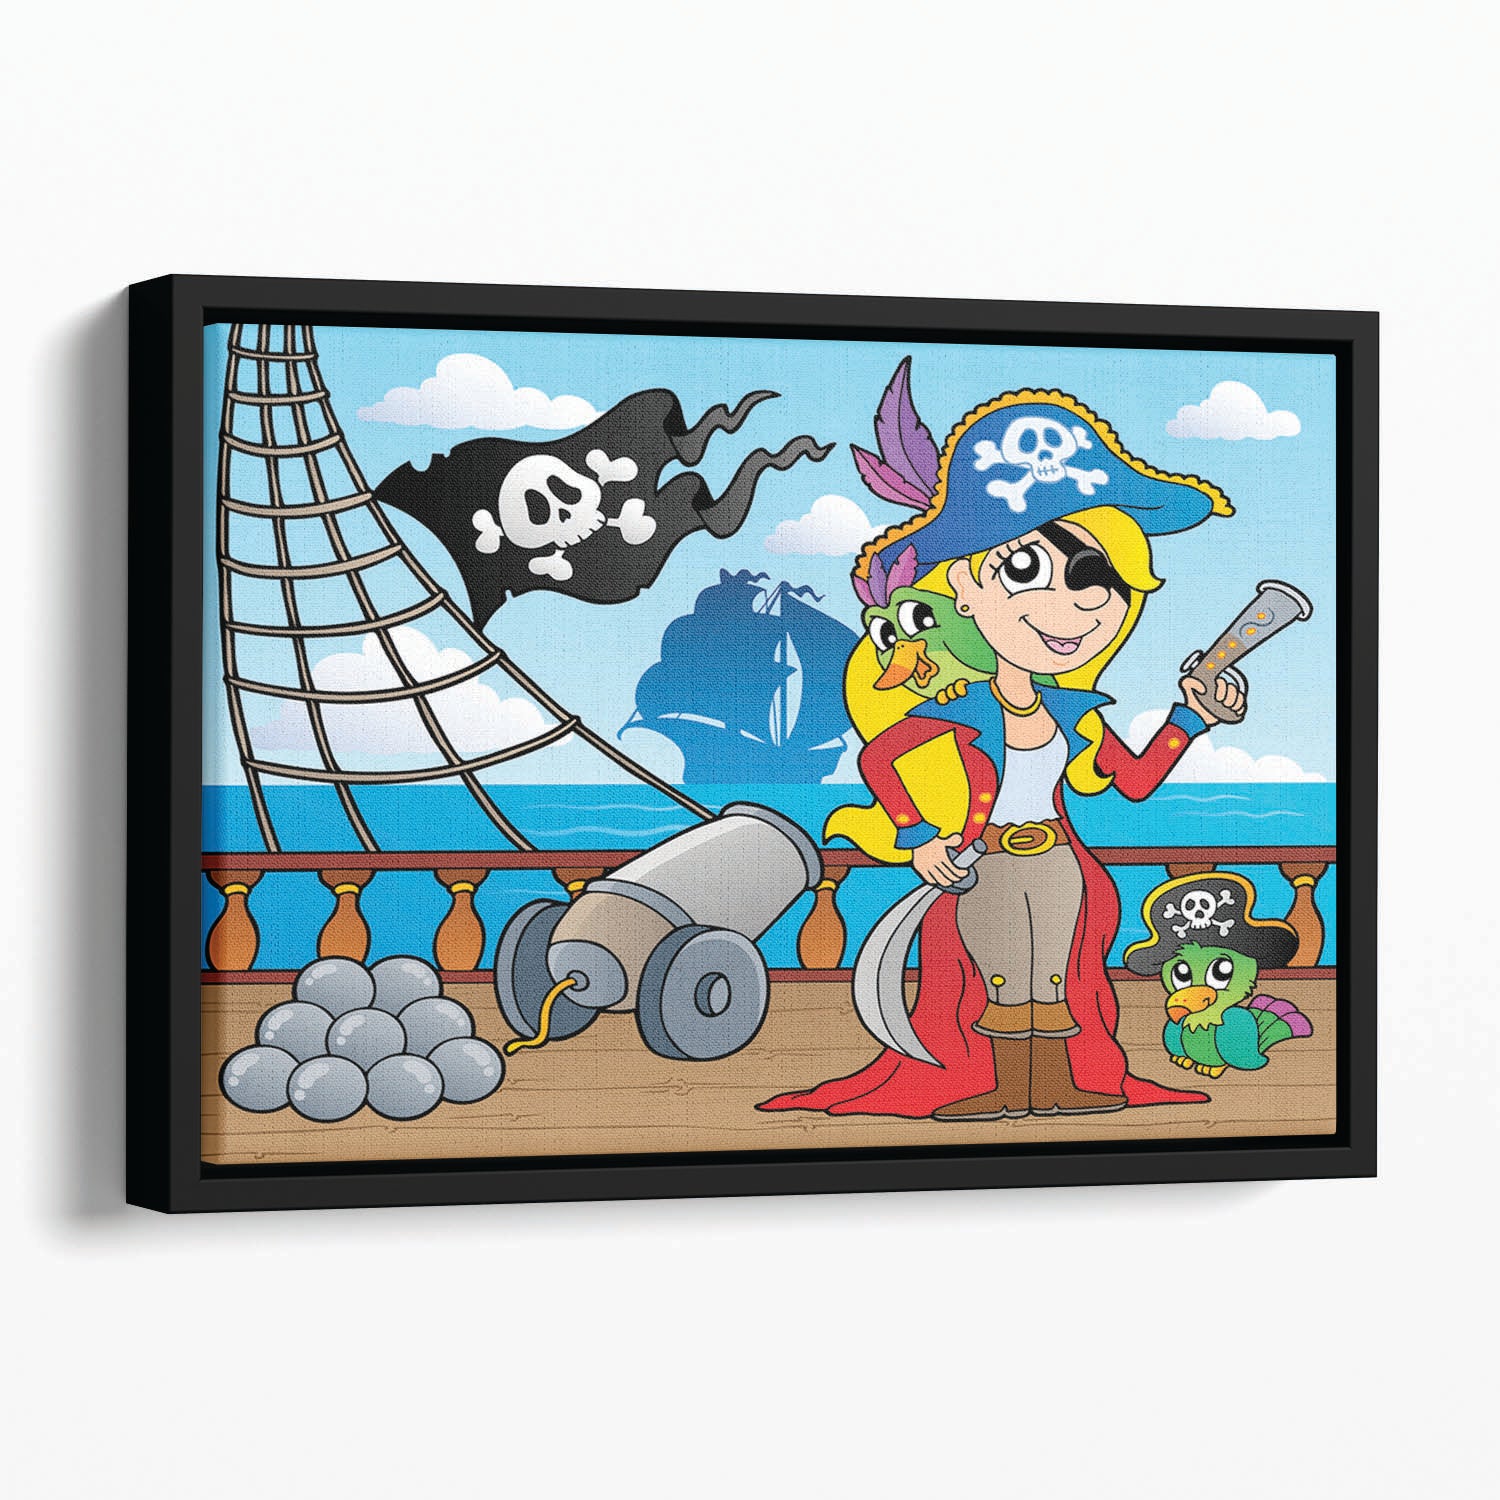 Pirate ship deck theme 9 Floating Framed Canvas